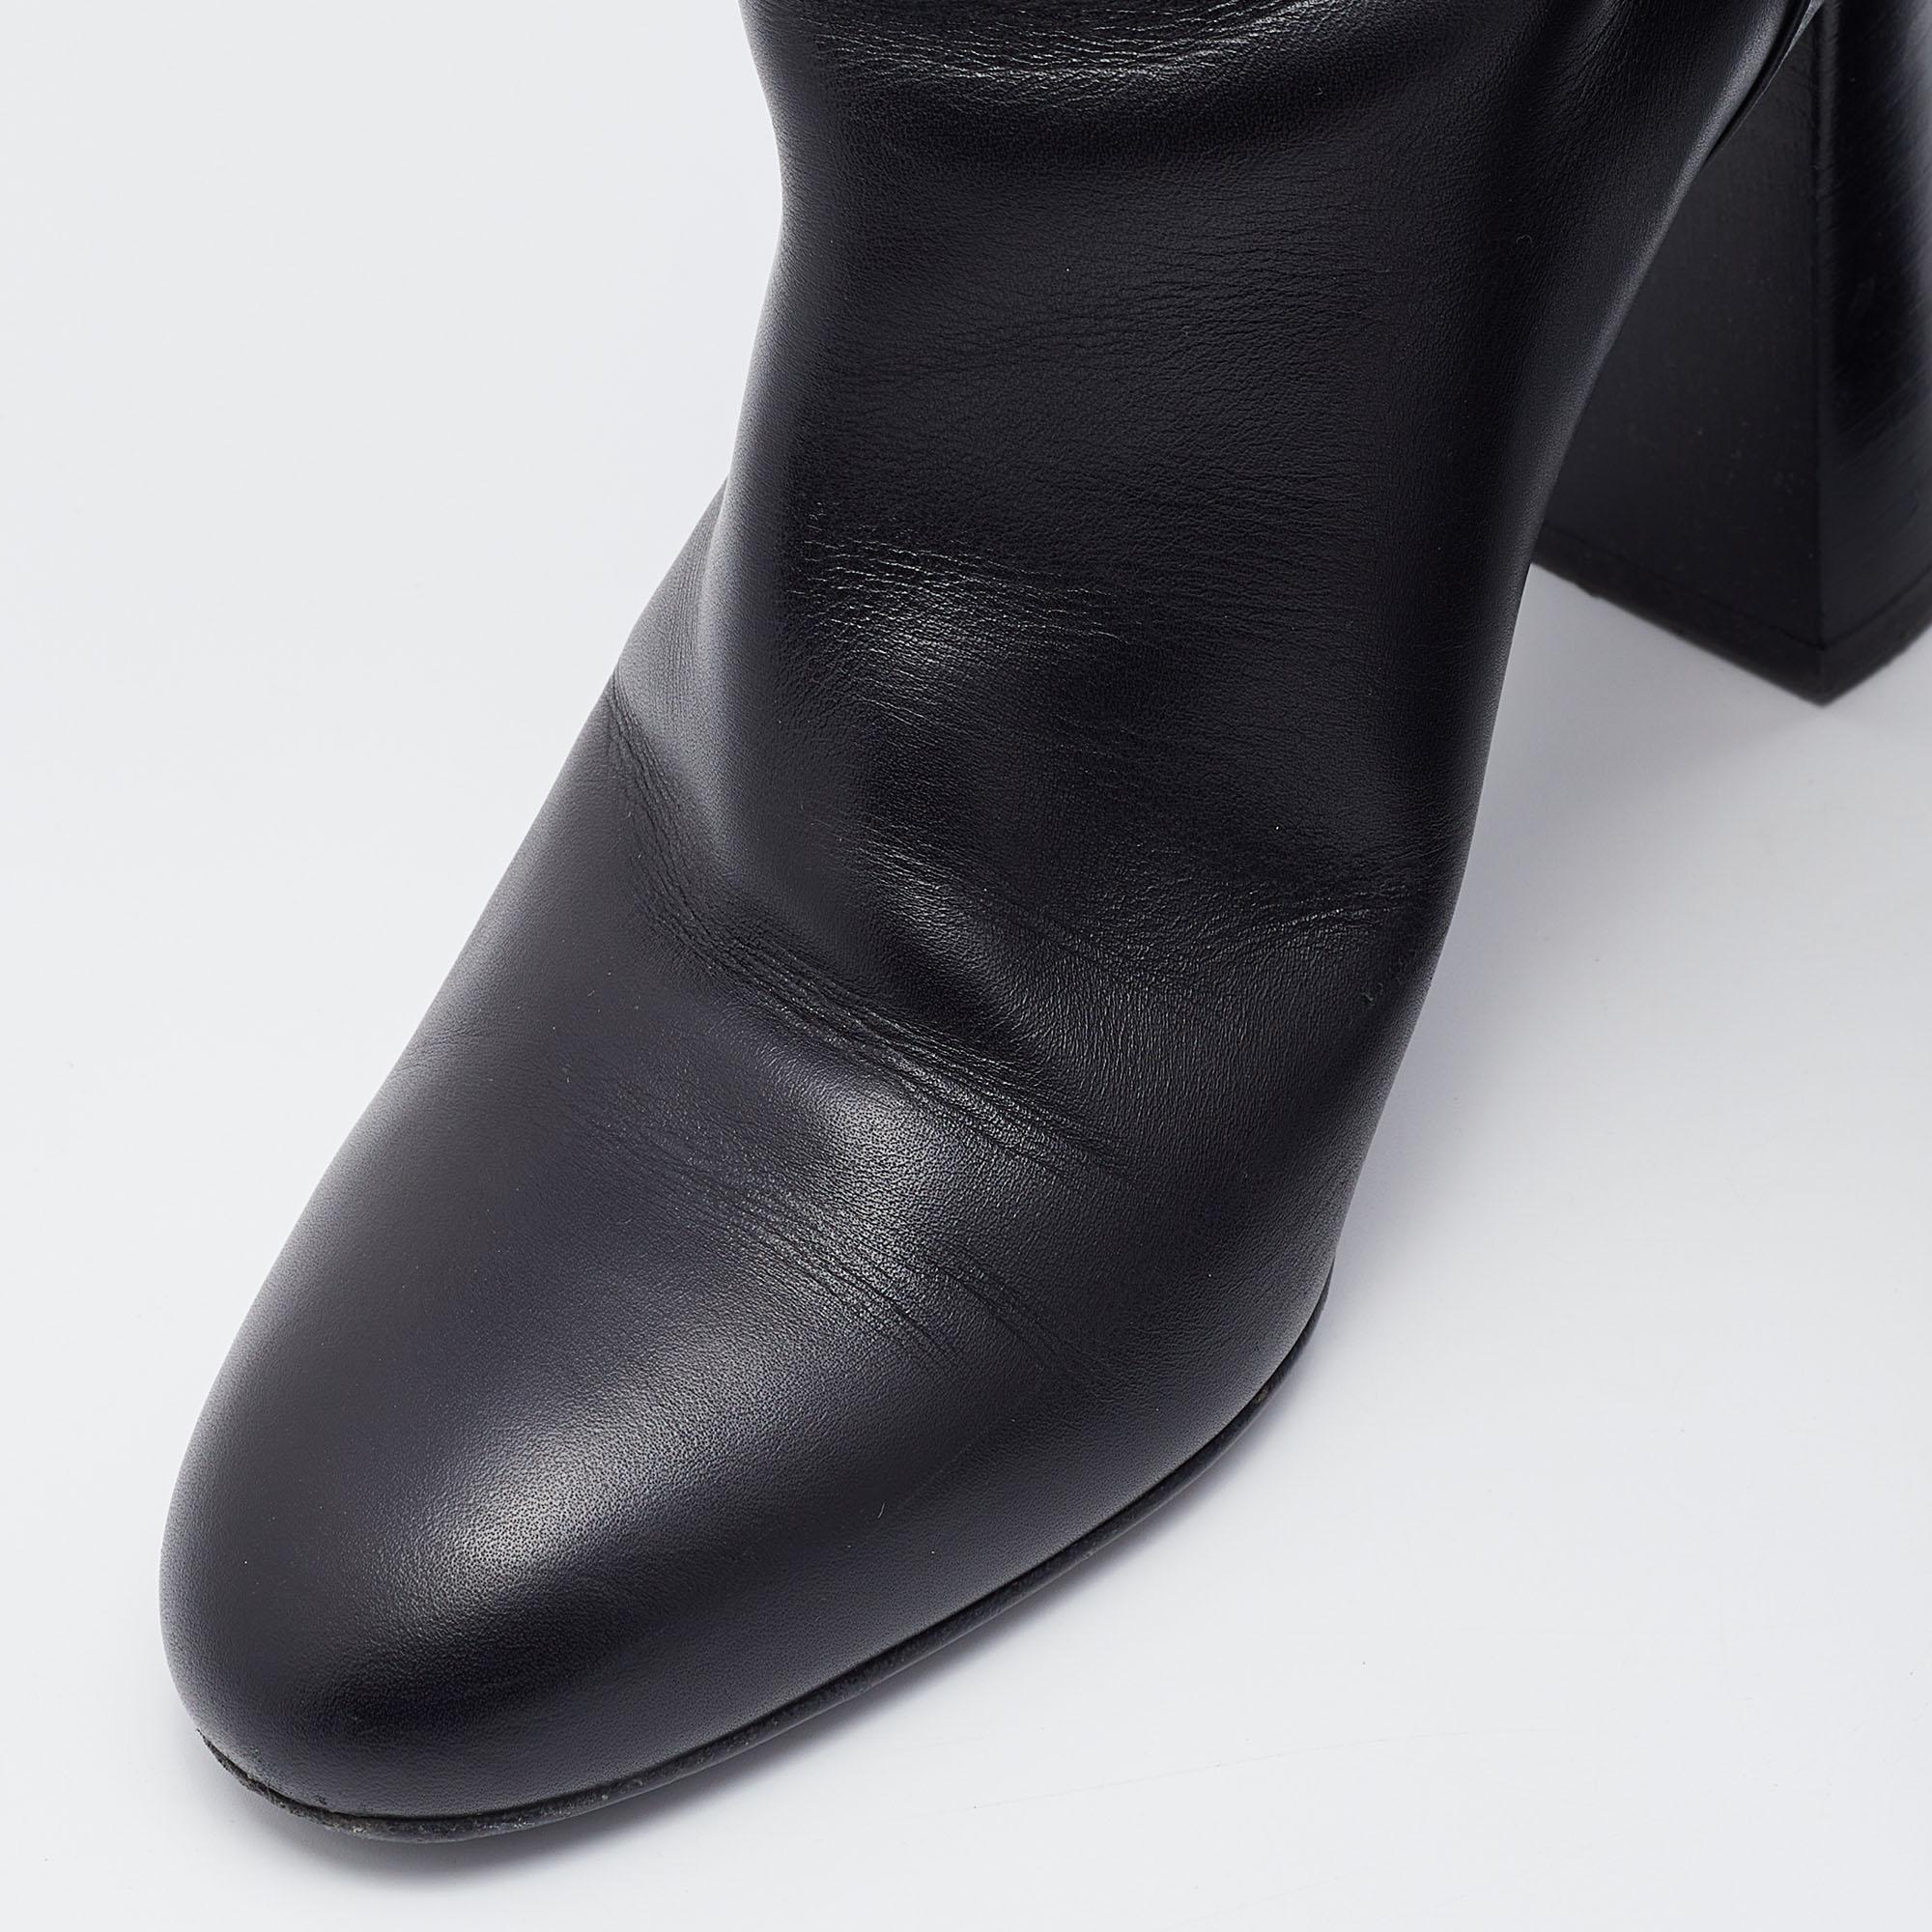 Hermes Black Leather Story Knee Length Boots Size 37.5 6